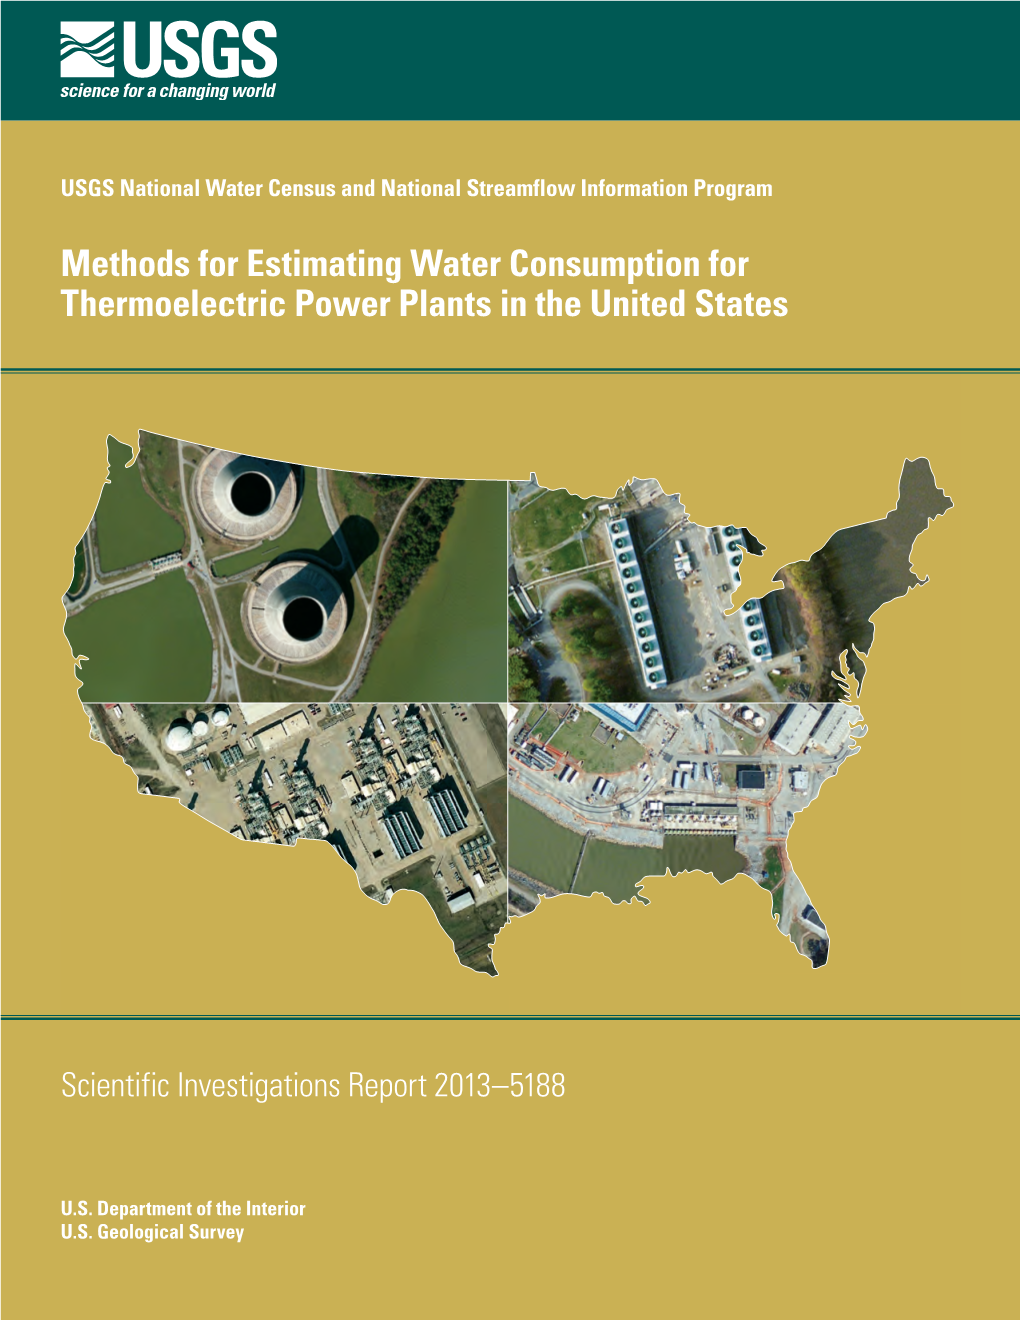 Methods for Estimating Water Consumption for Thermoelectric Power Plants in the United States